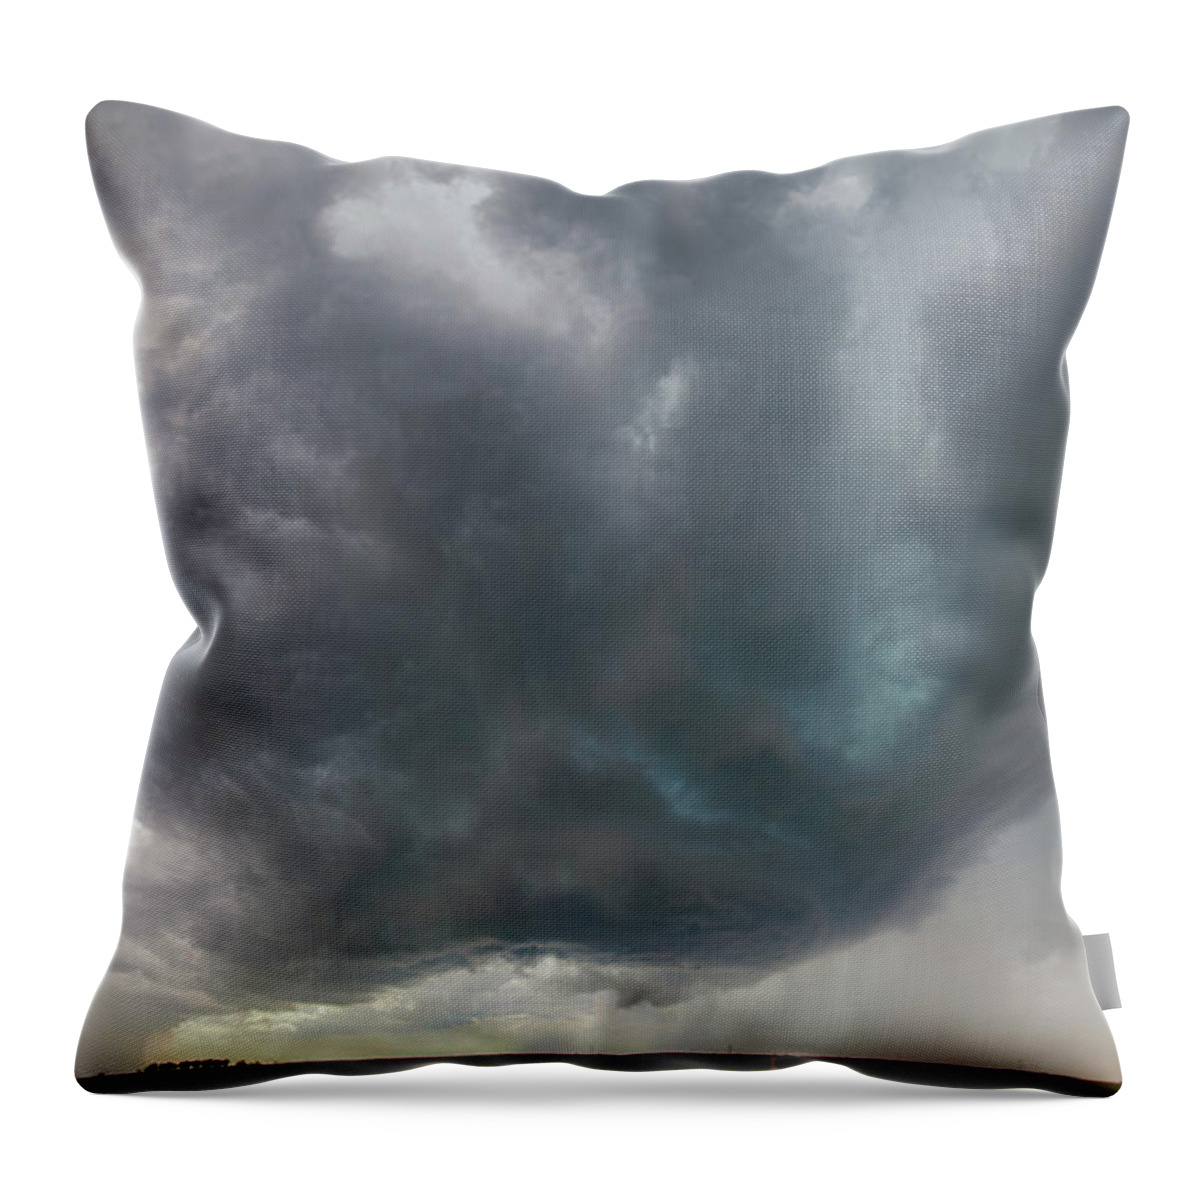 Nebraskasc Throw Pillow featuring the photograph Under a Supercell 028 by Dale Kaminski